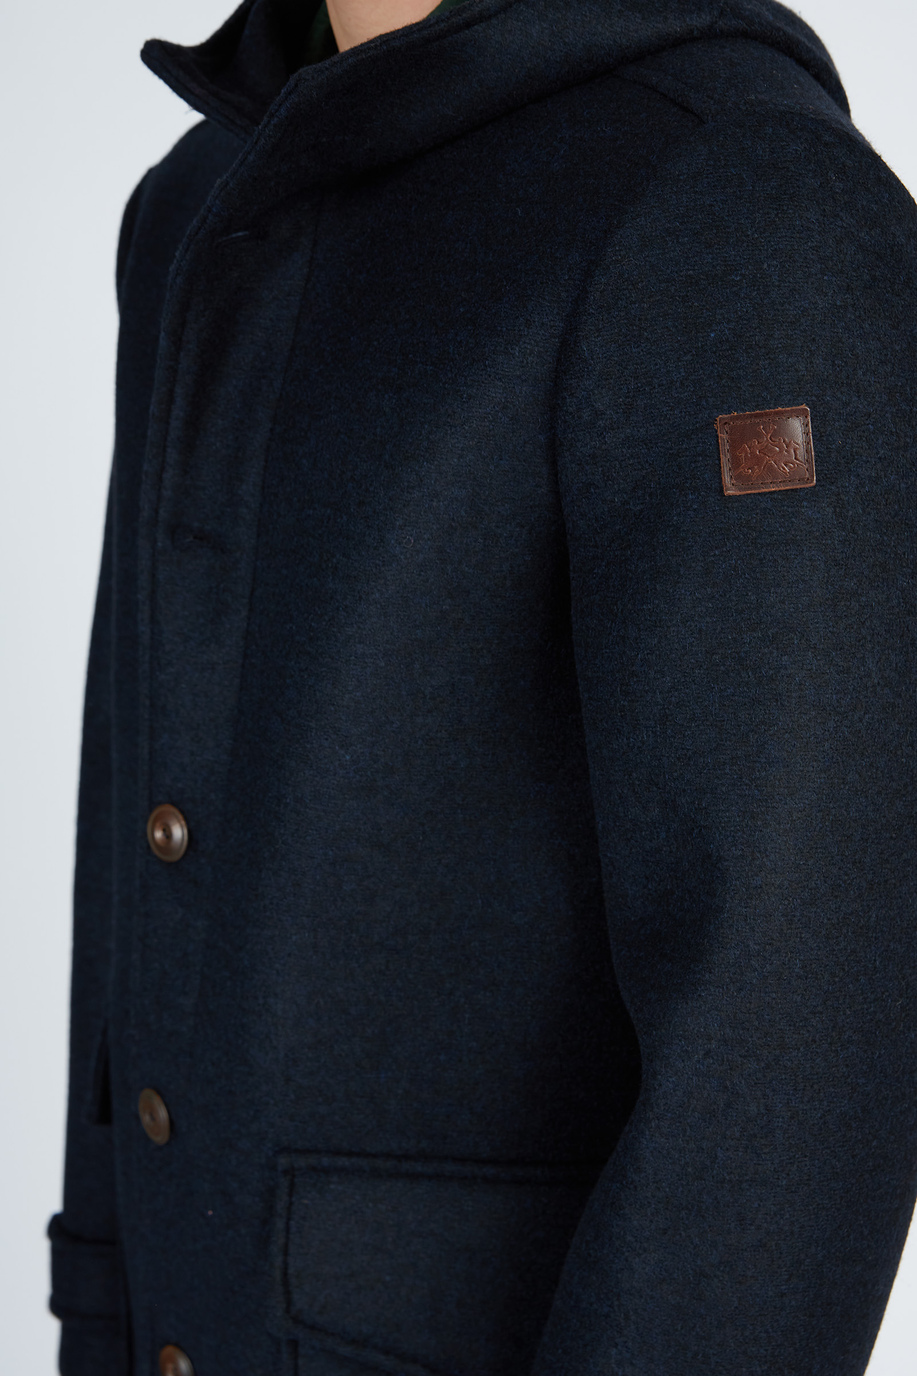 Leyendas Del Polo men’s wool blend jacket with buttons regular fit - Winter looks for him | La Martina - Official Online Shop